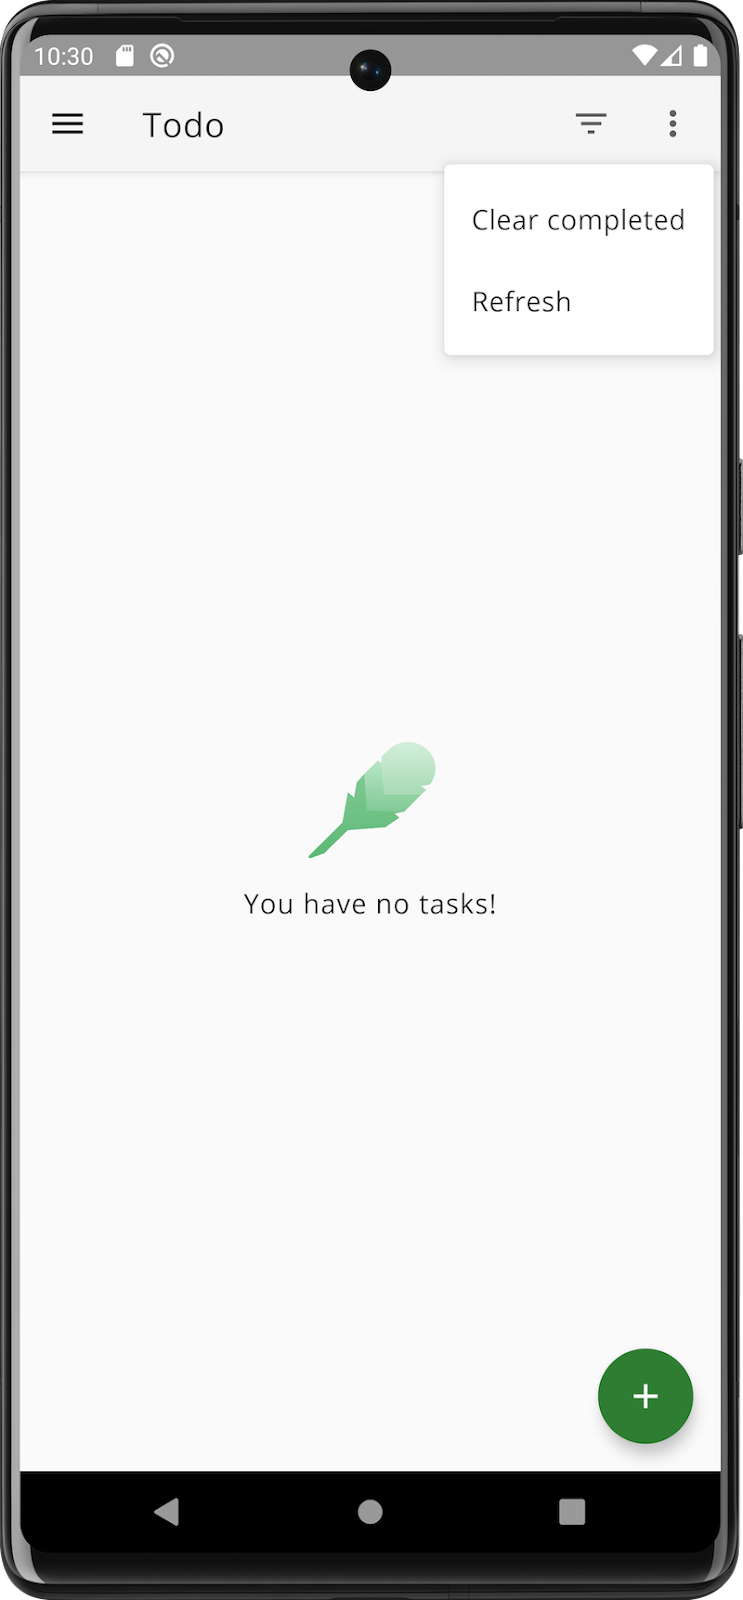 The app’s tasks screen with the action menu displayed.